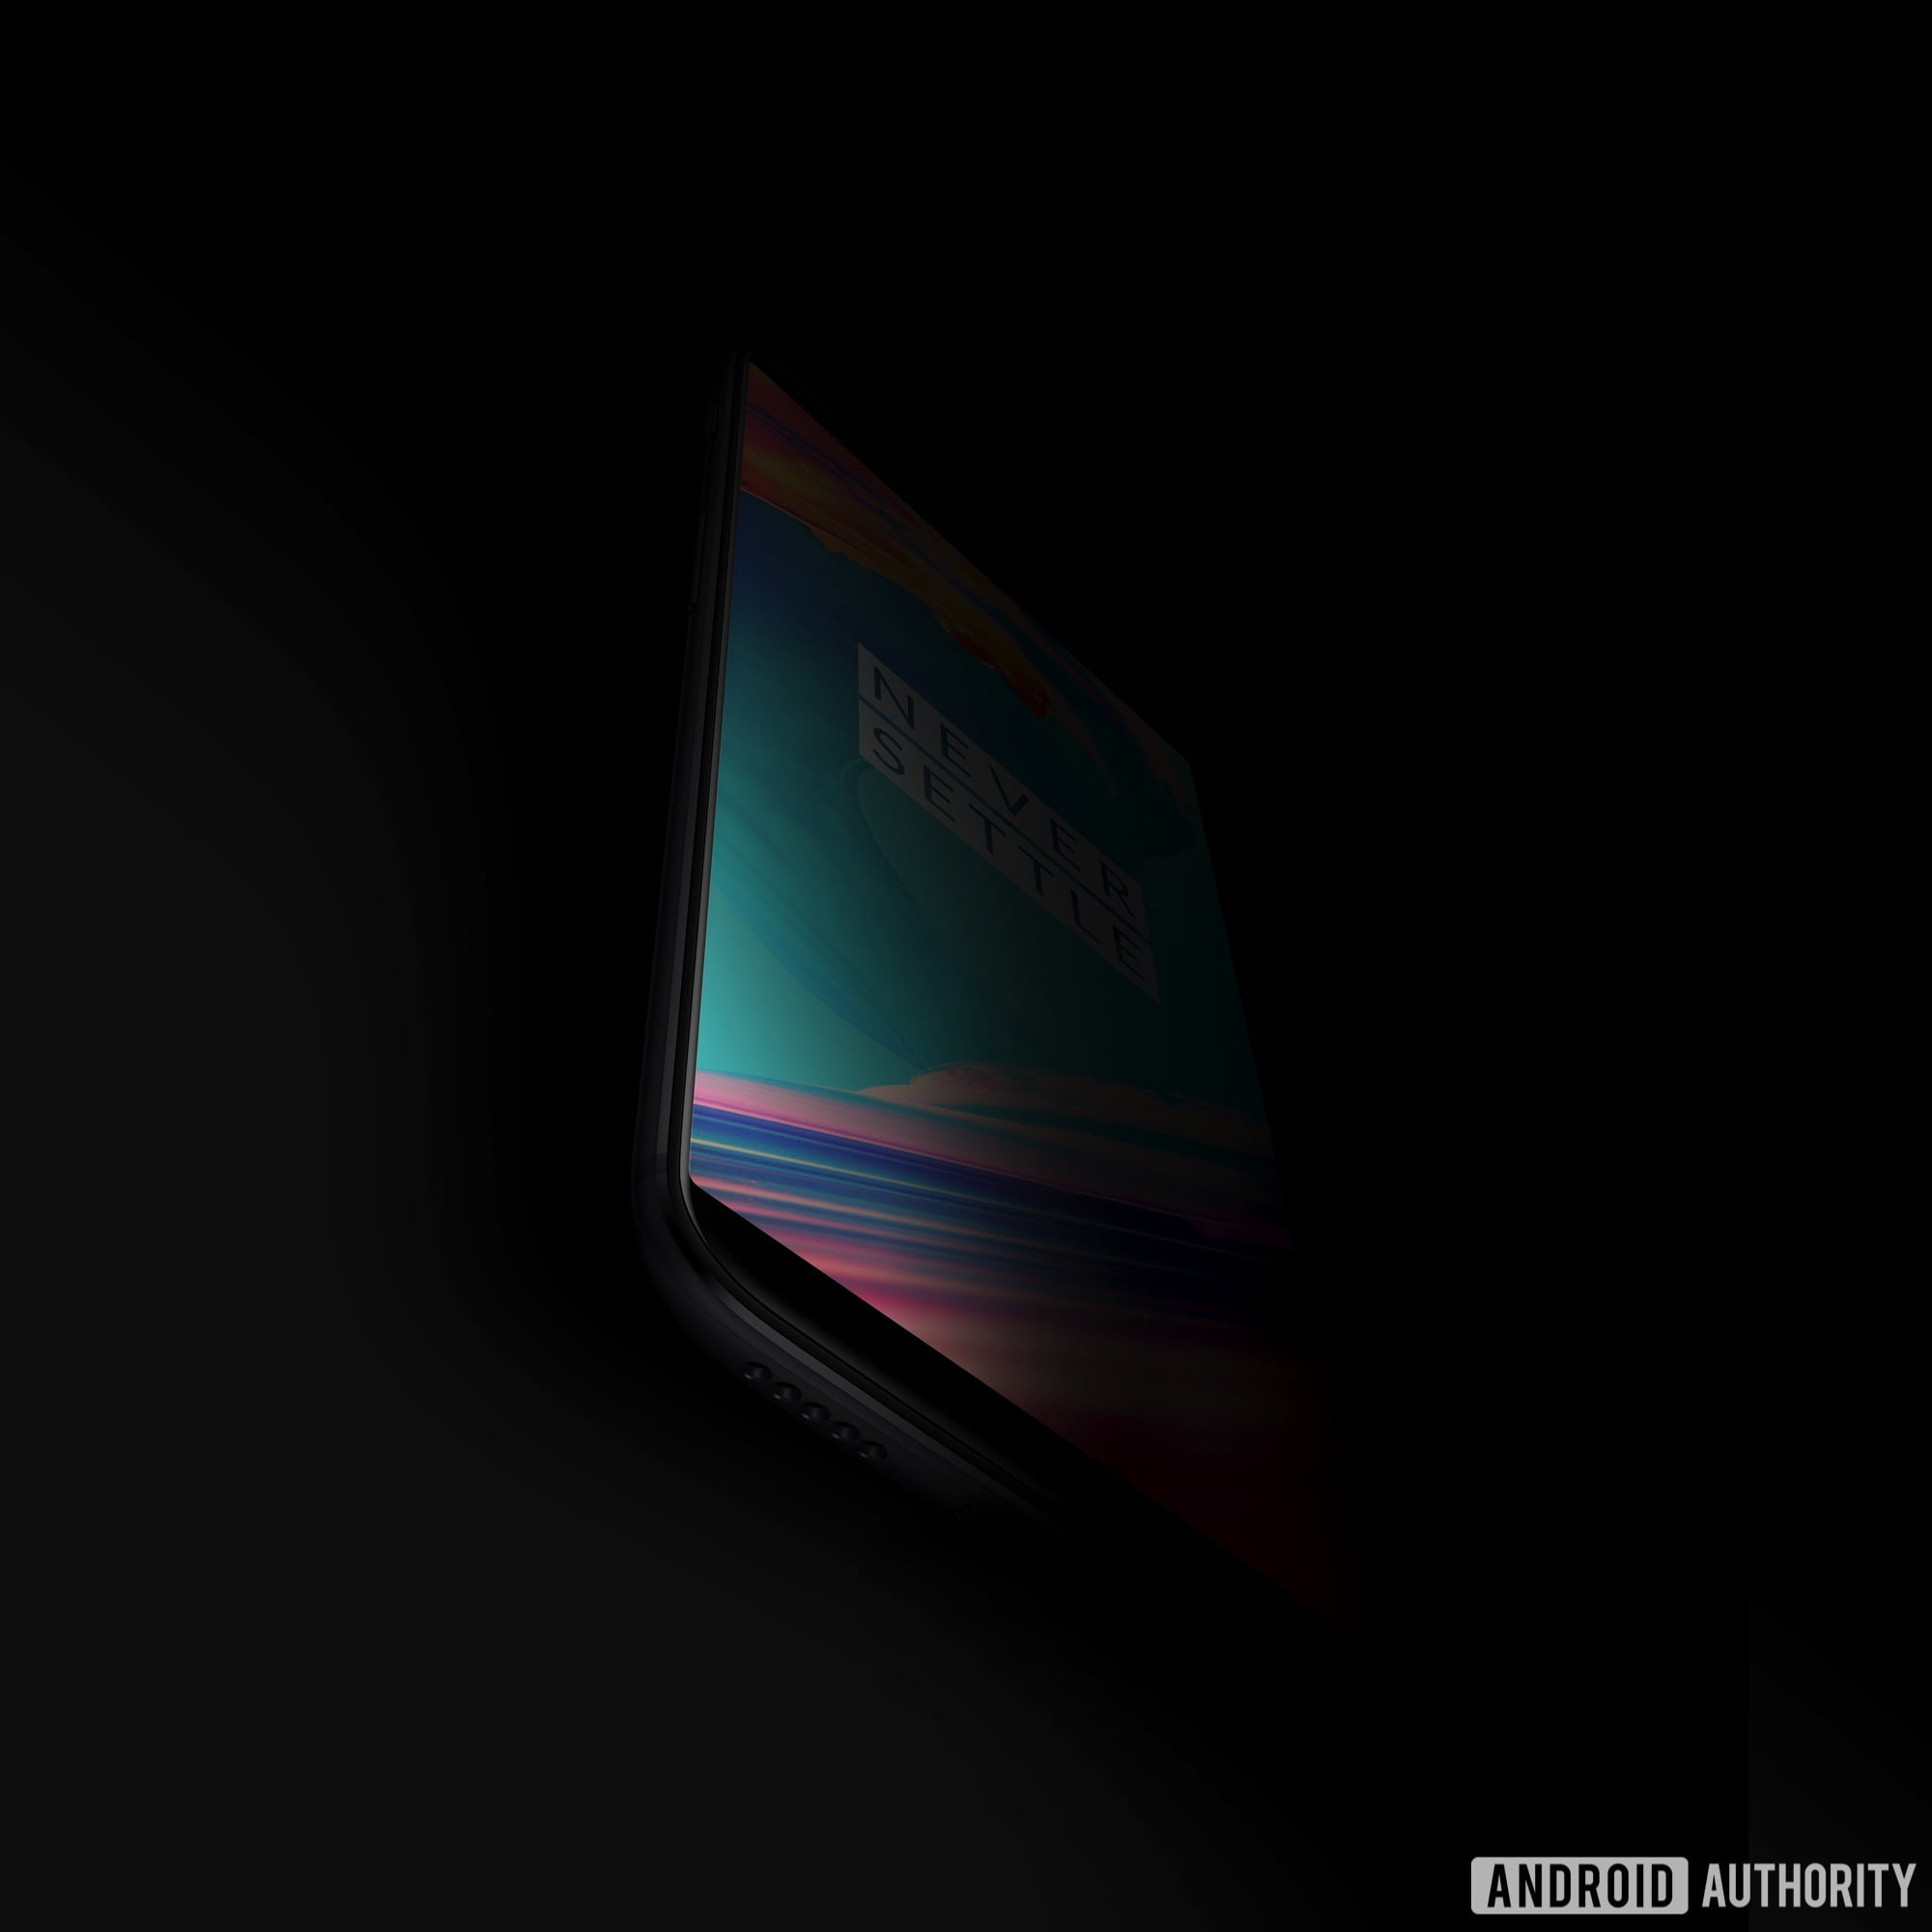 OnePlus 5T Teaser Image